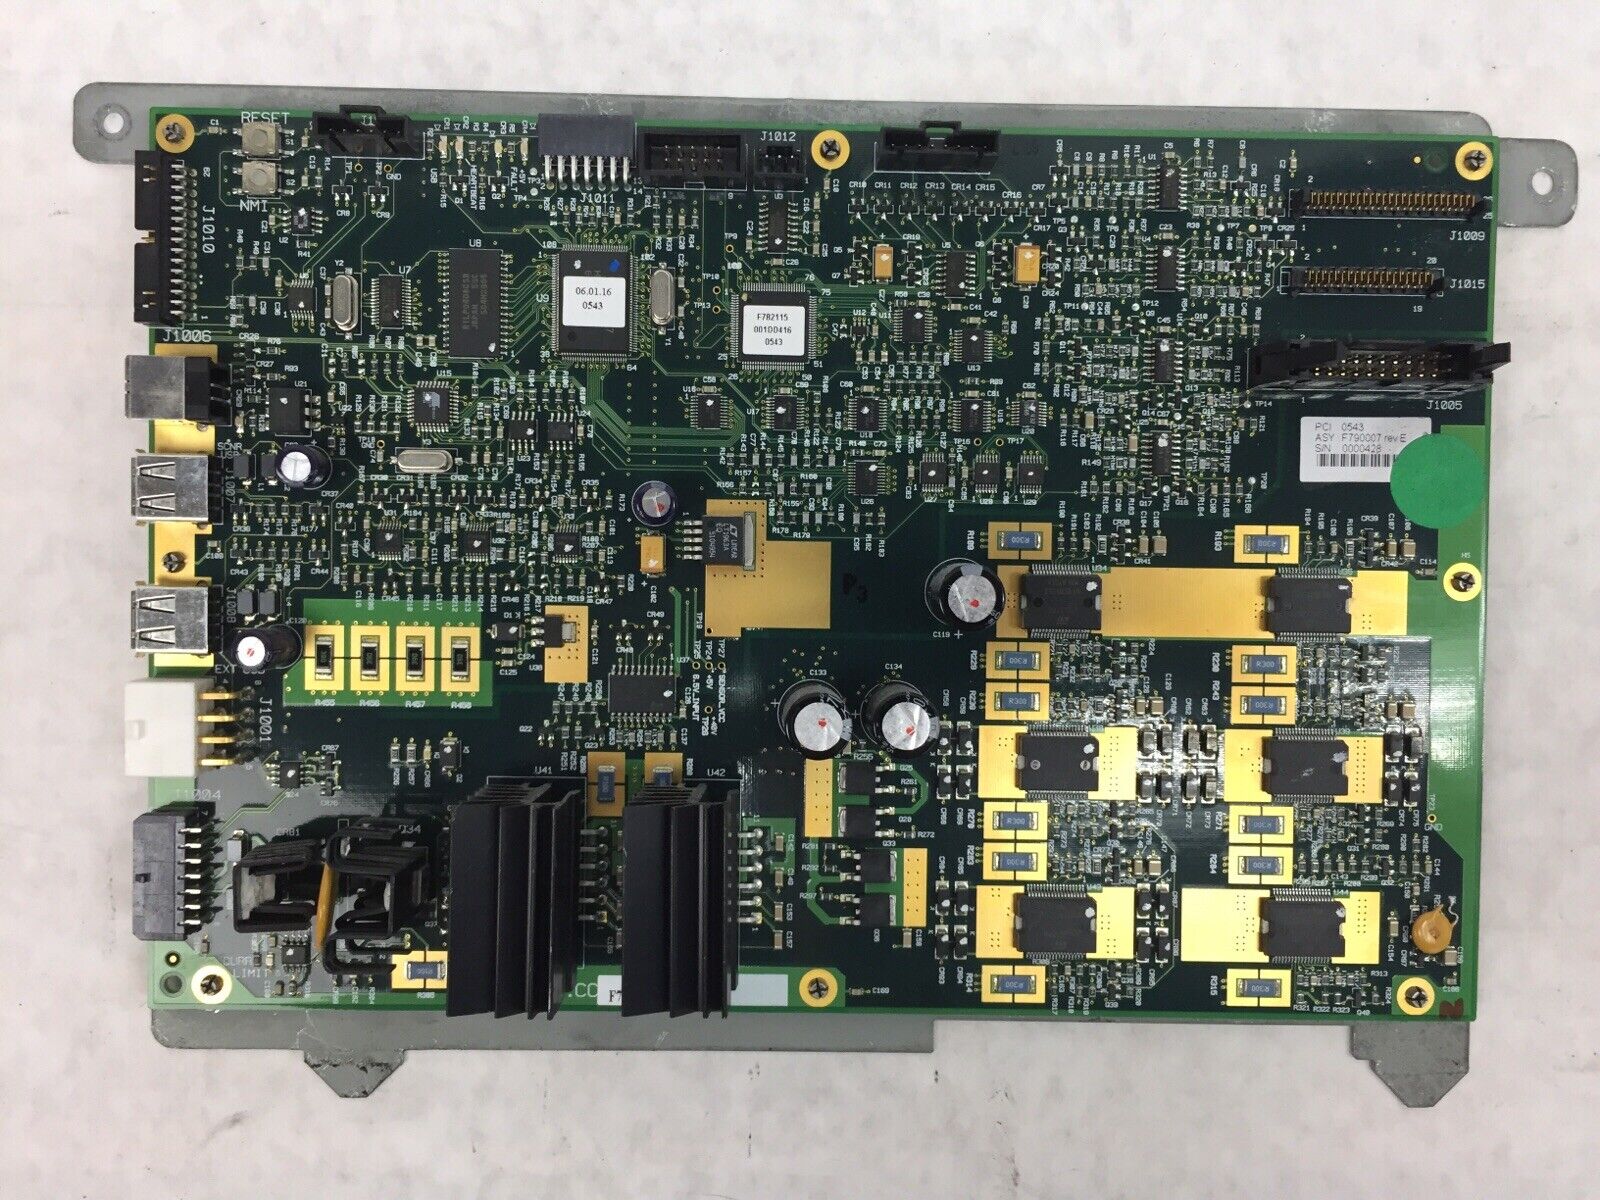 ASSY F790007 Board for a PitneyBowes